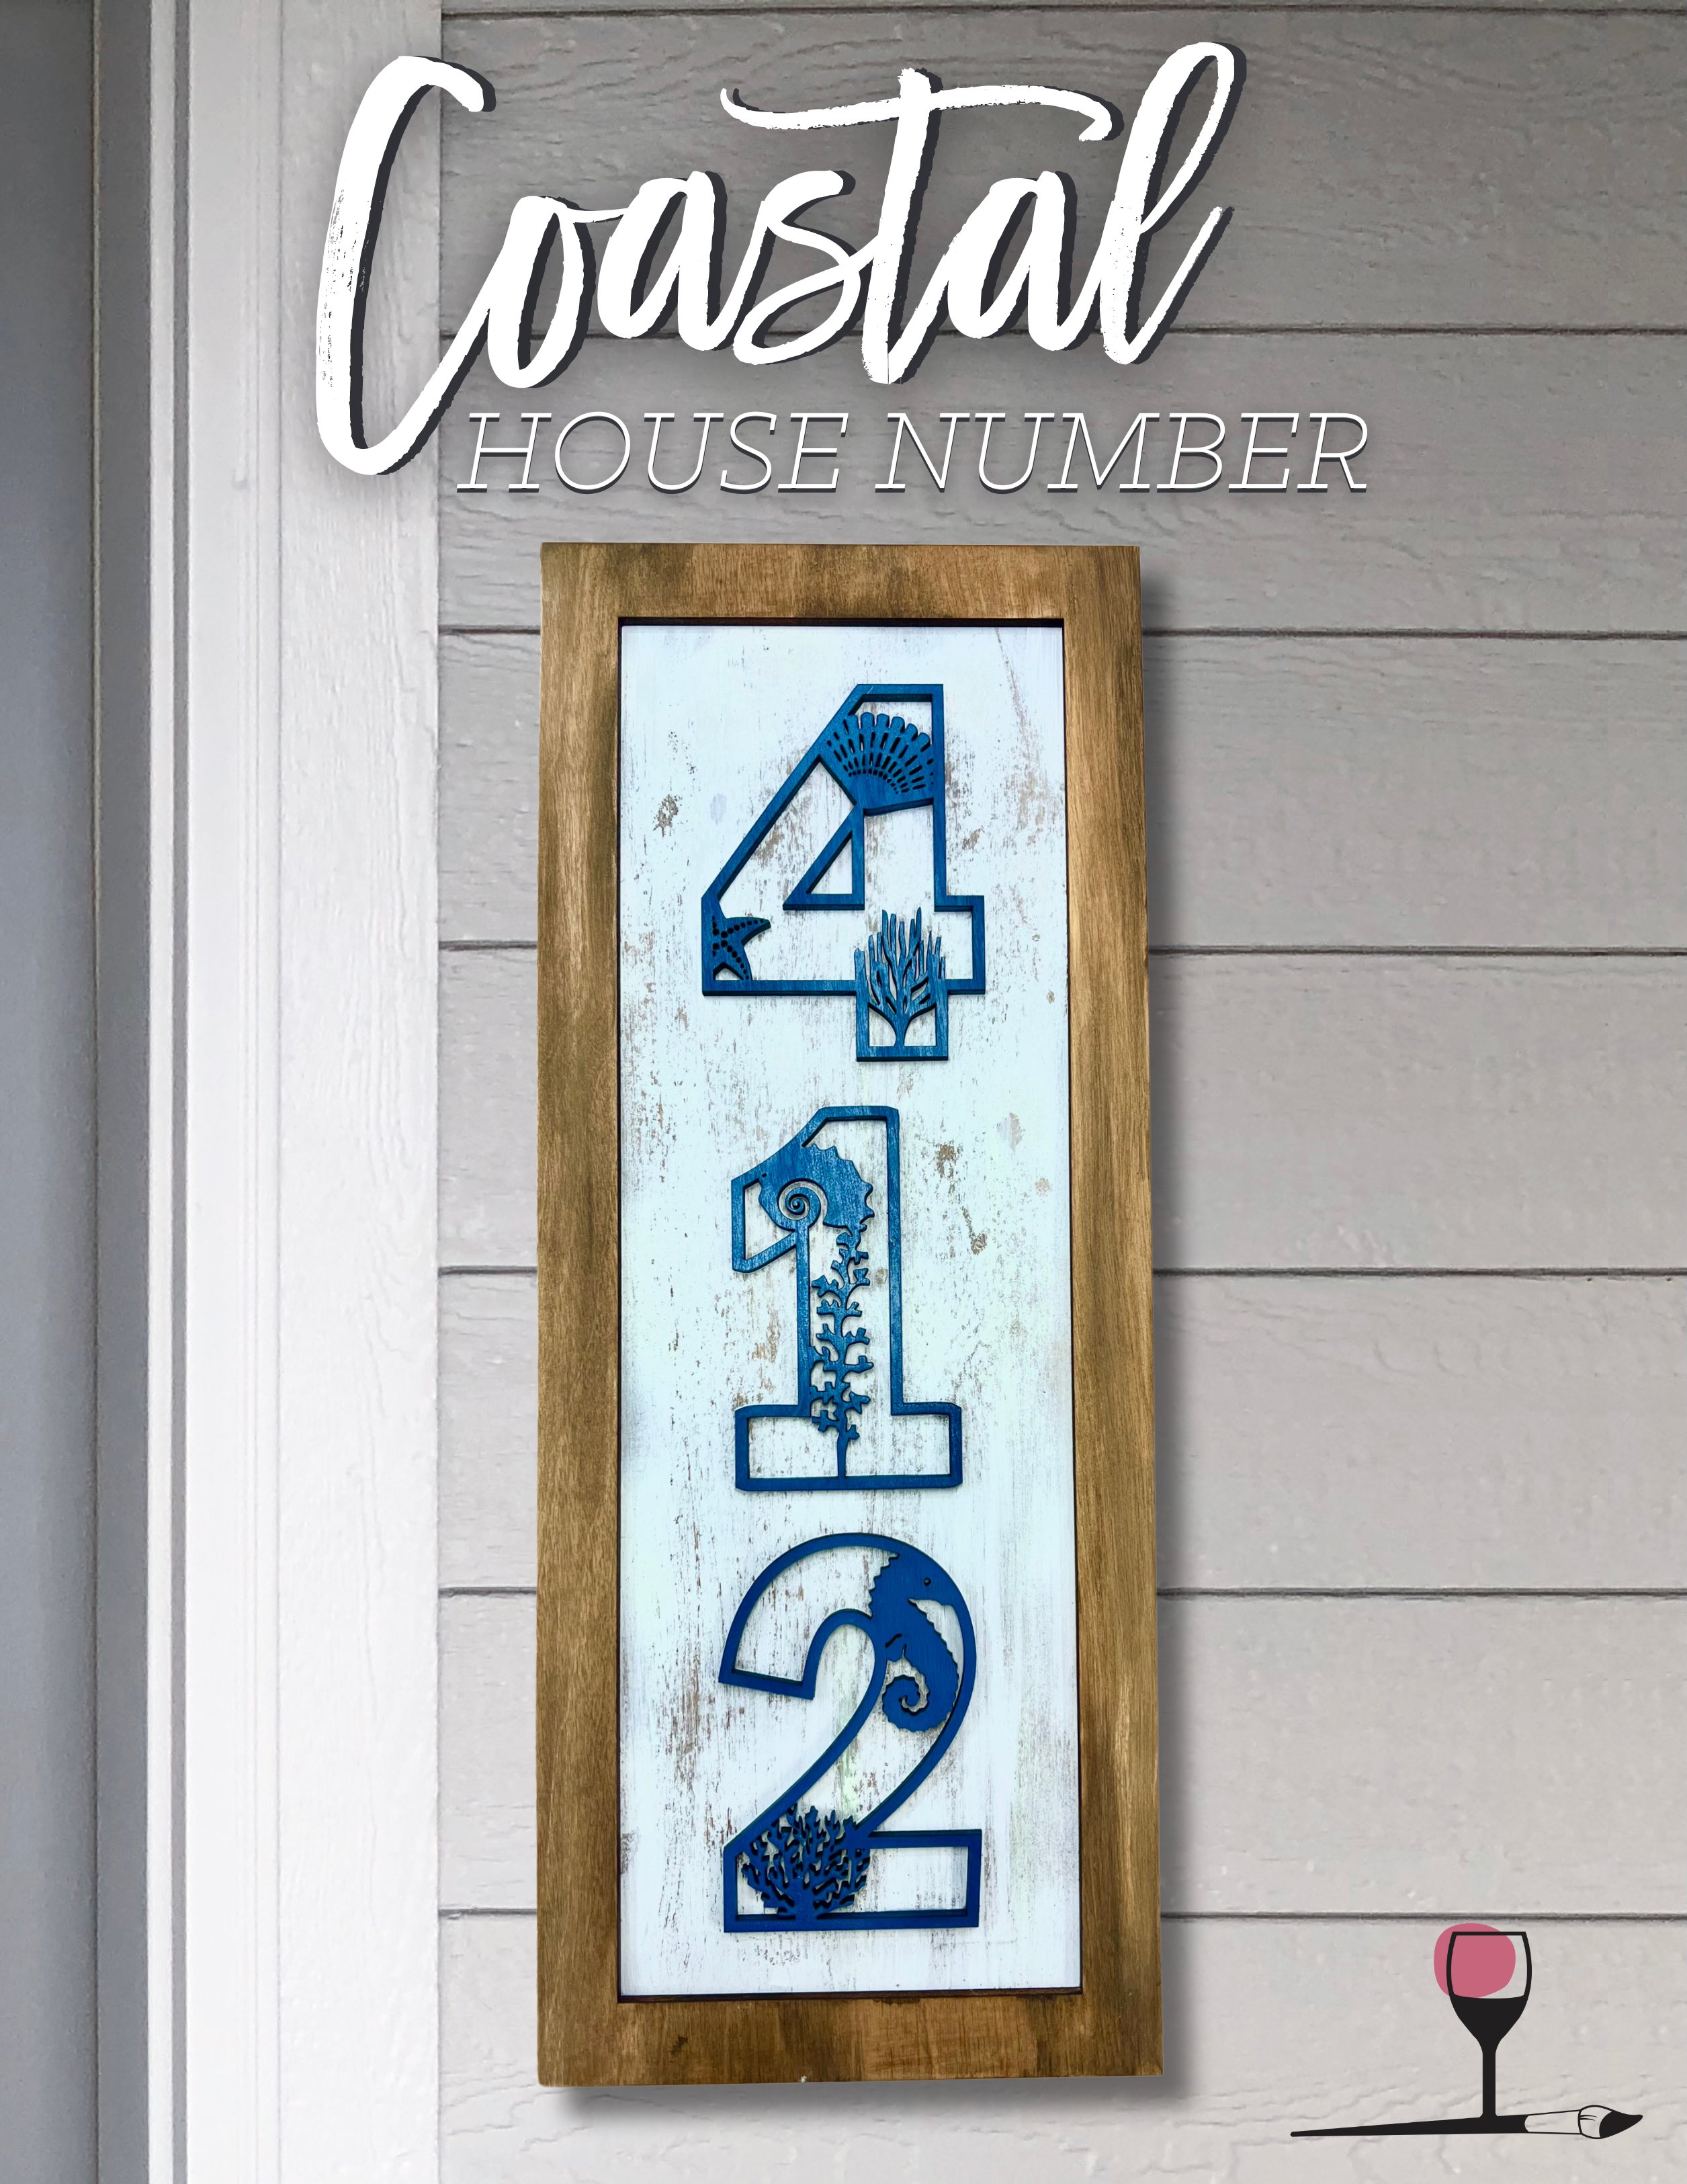 NEW! Wooden Coastal House Number Workshop | Must save your seat and send us your address # by May 27th